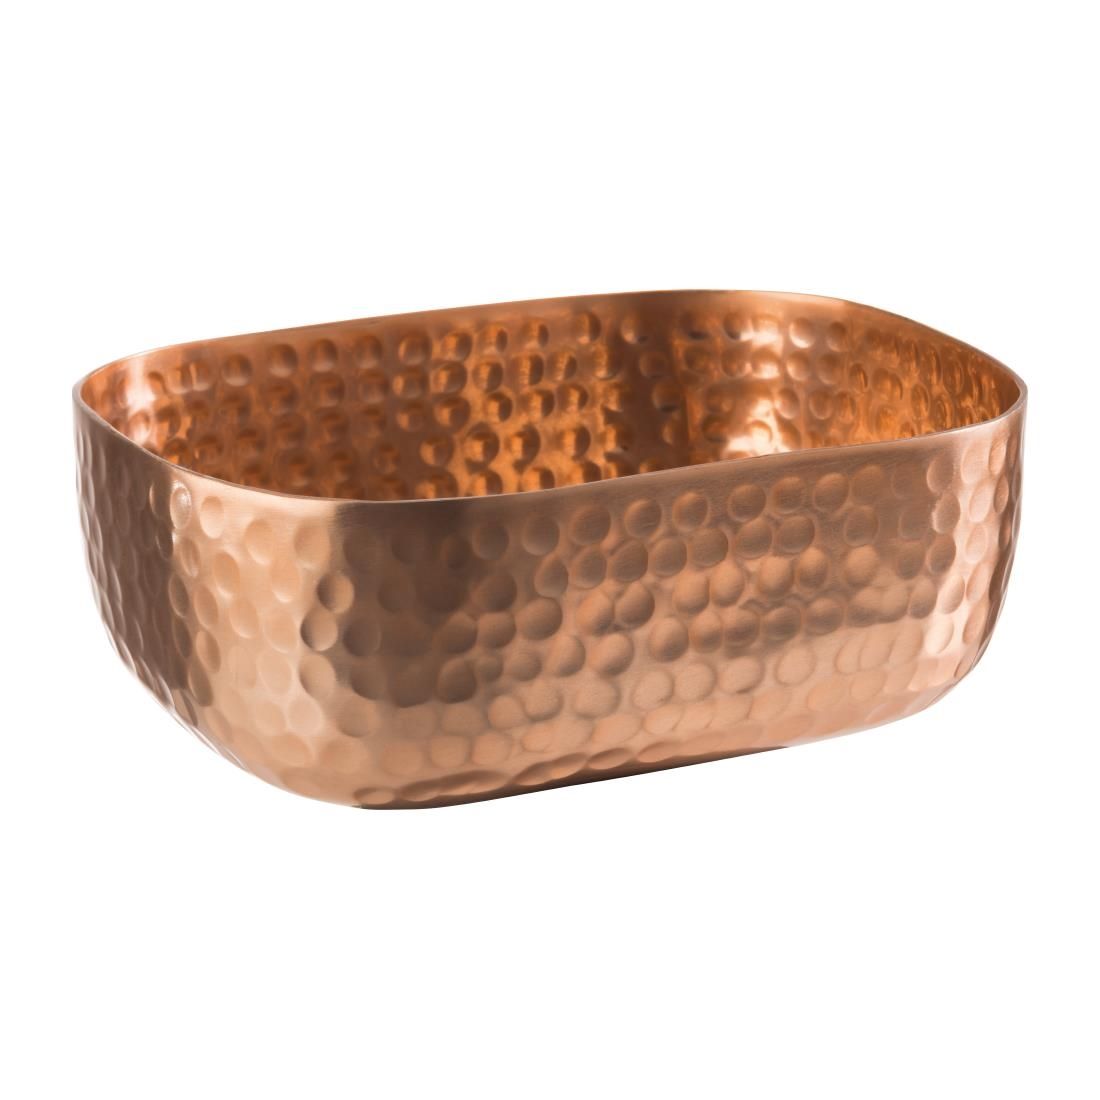 FE974 APS Hammered Serving Bowl Copper 120 x 155mm JD Catering Equipment Solutions Ltd